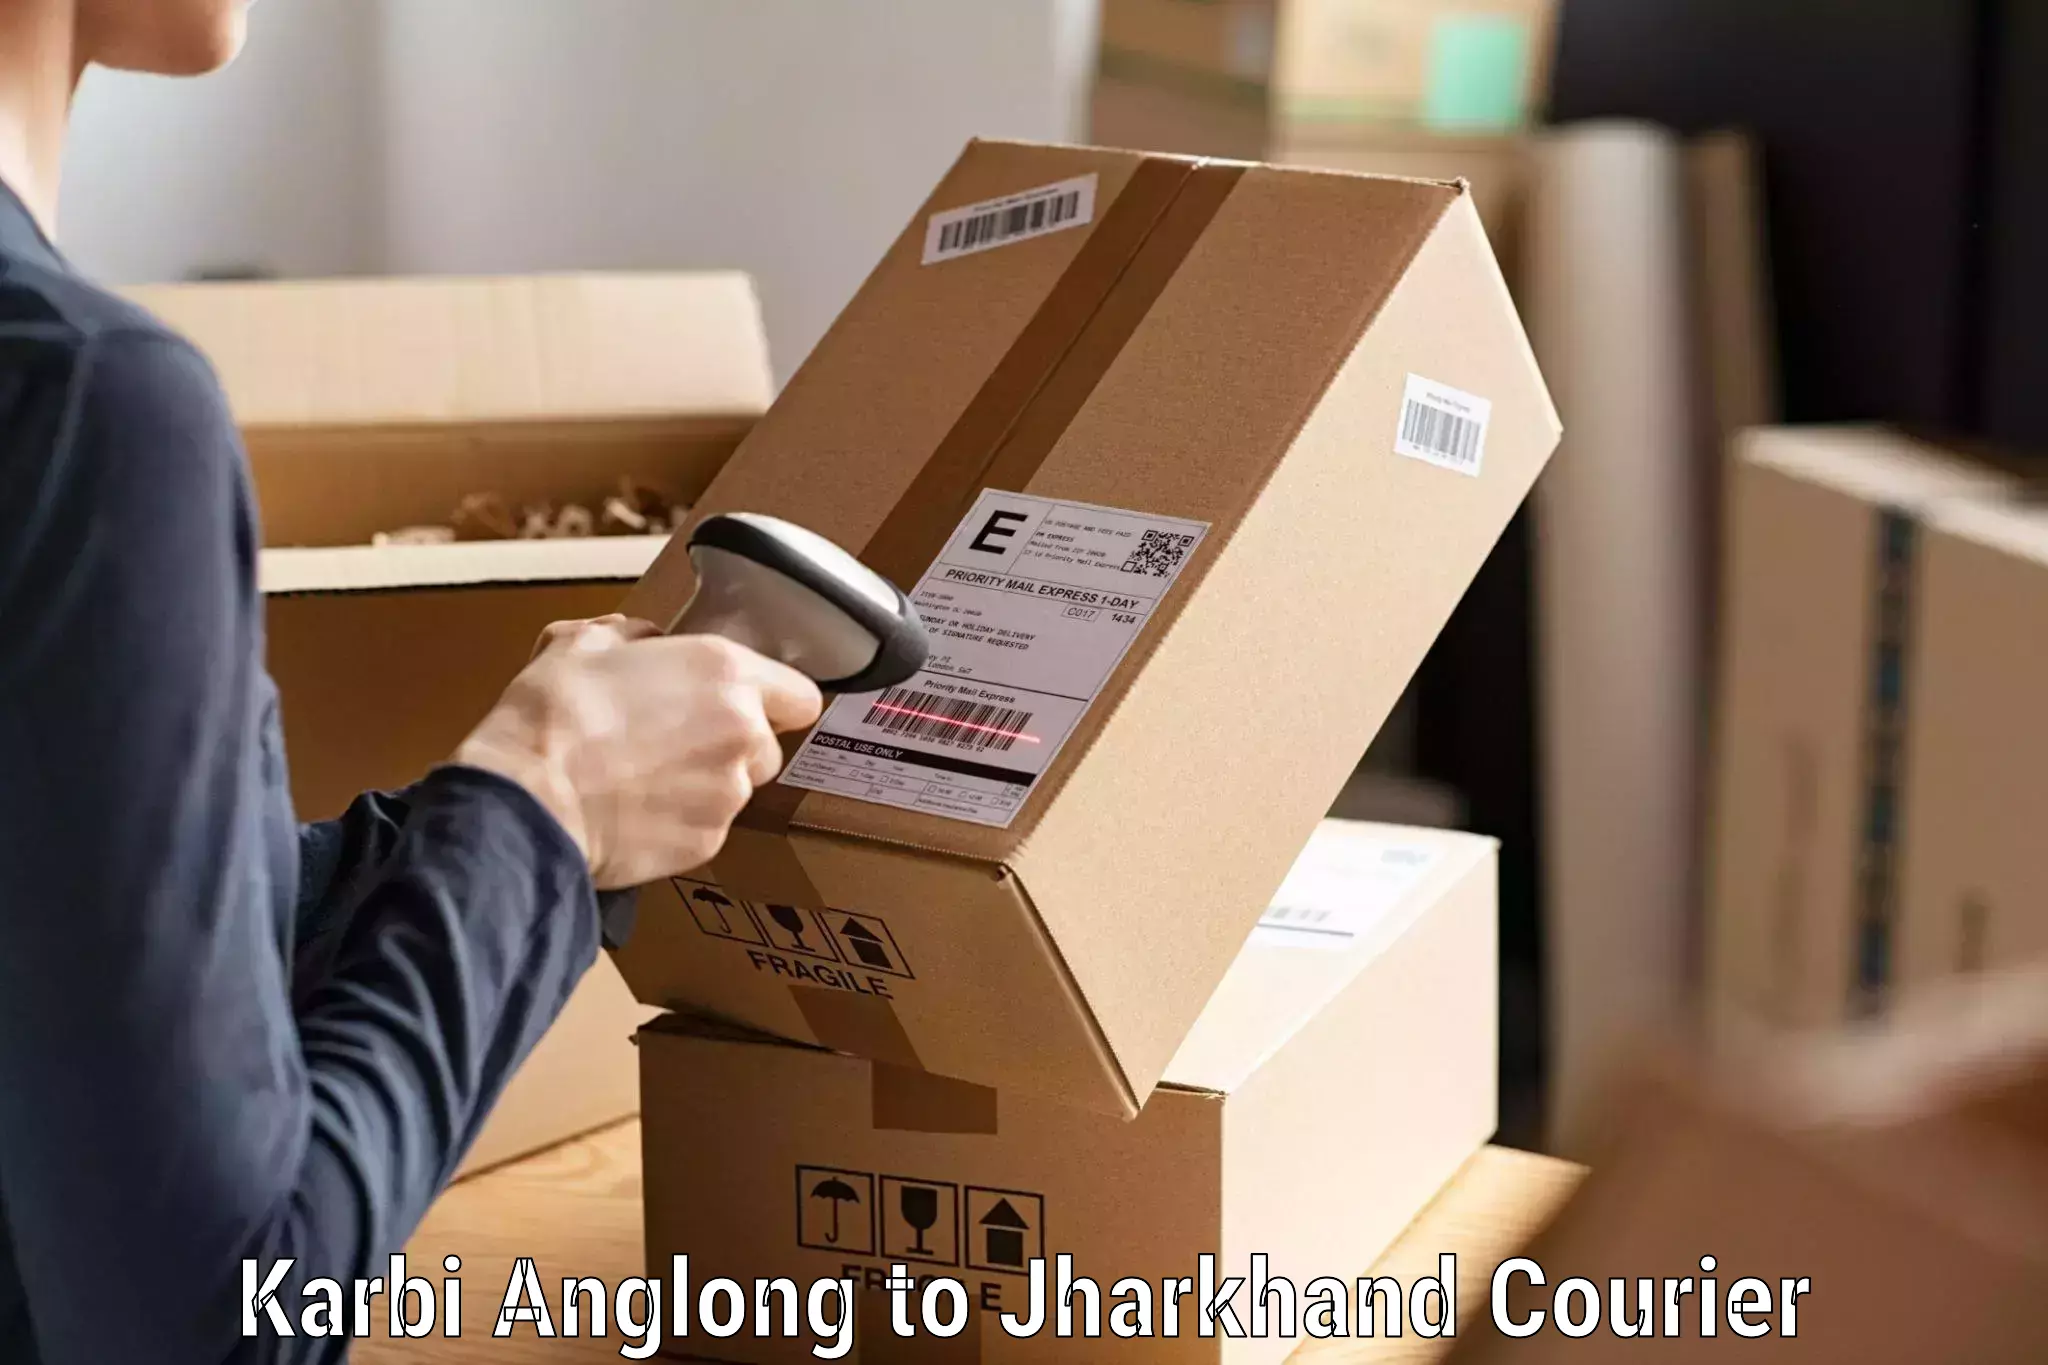 Multi-service courier options in Karbi Anglong to Medininagar